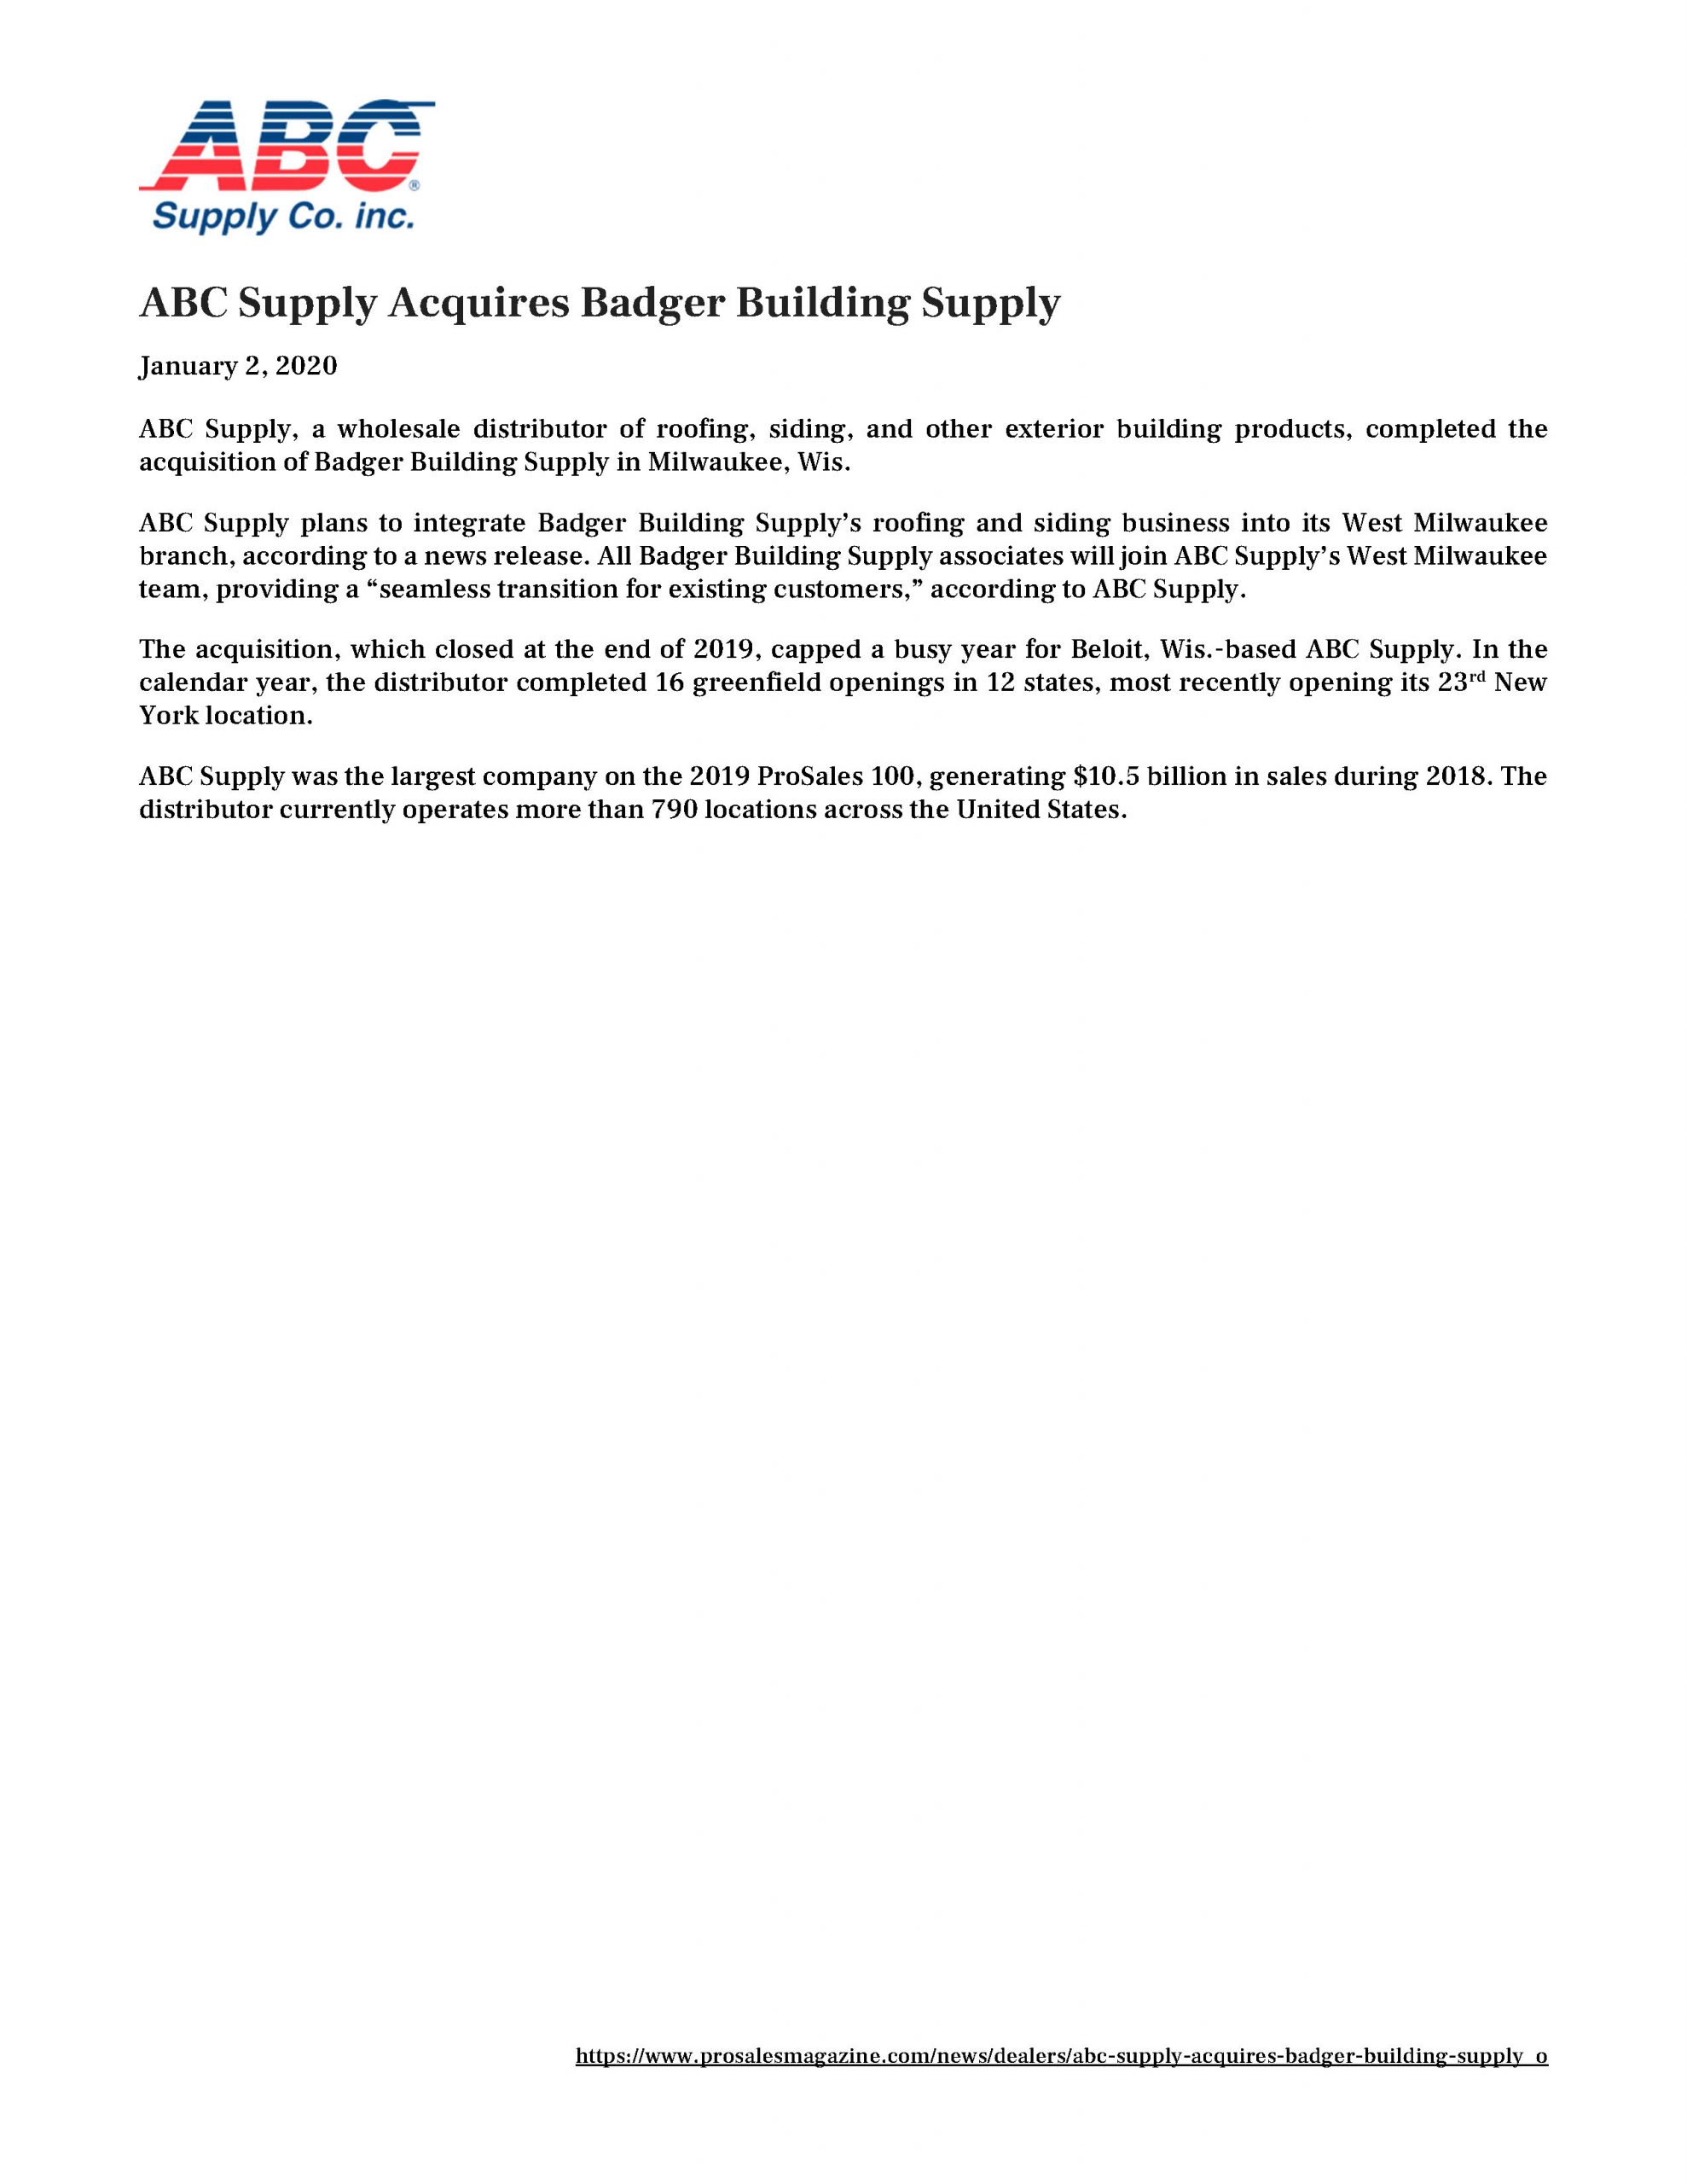 ABC Supply Acquires Badger Building Supply 1.2.2020